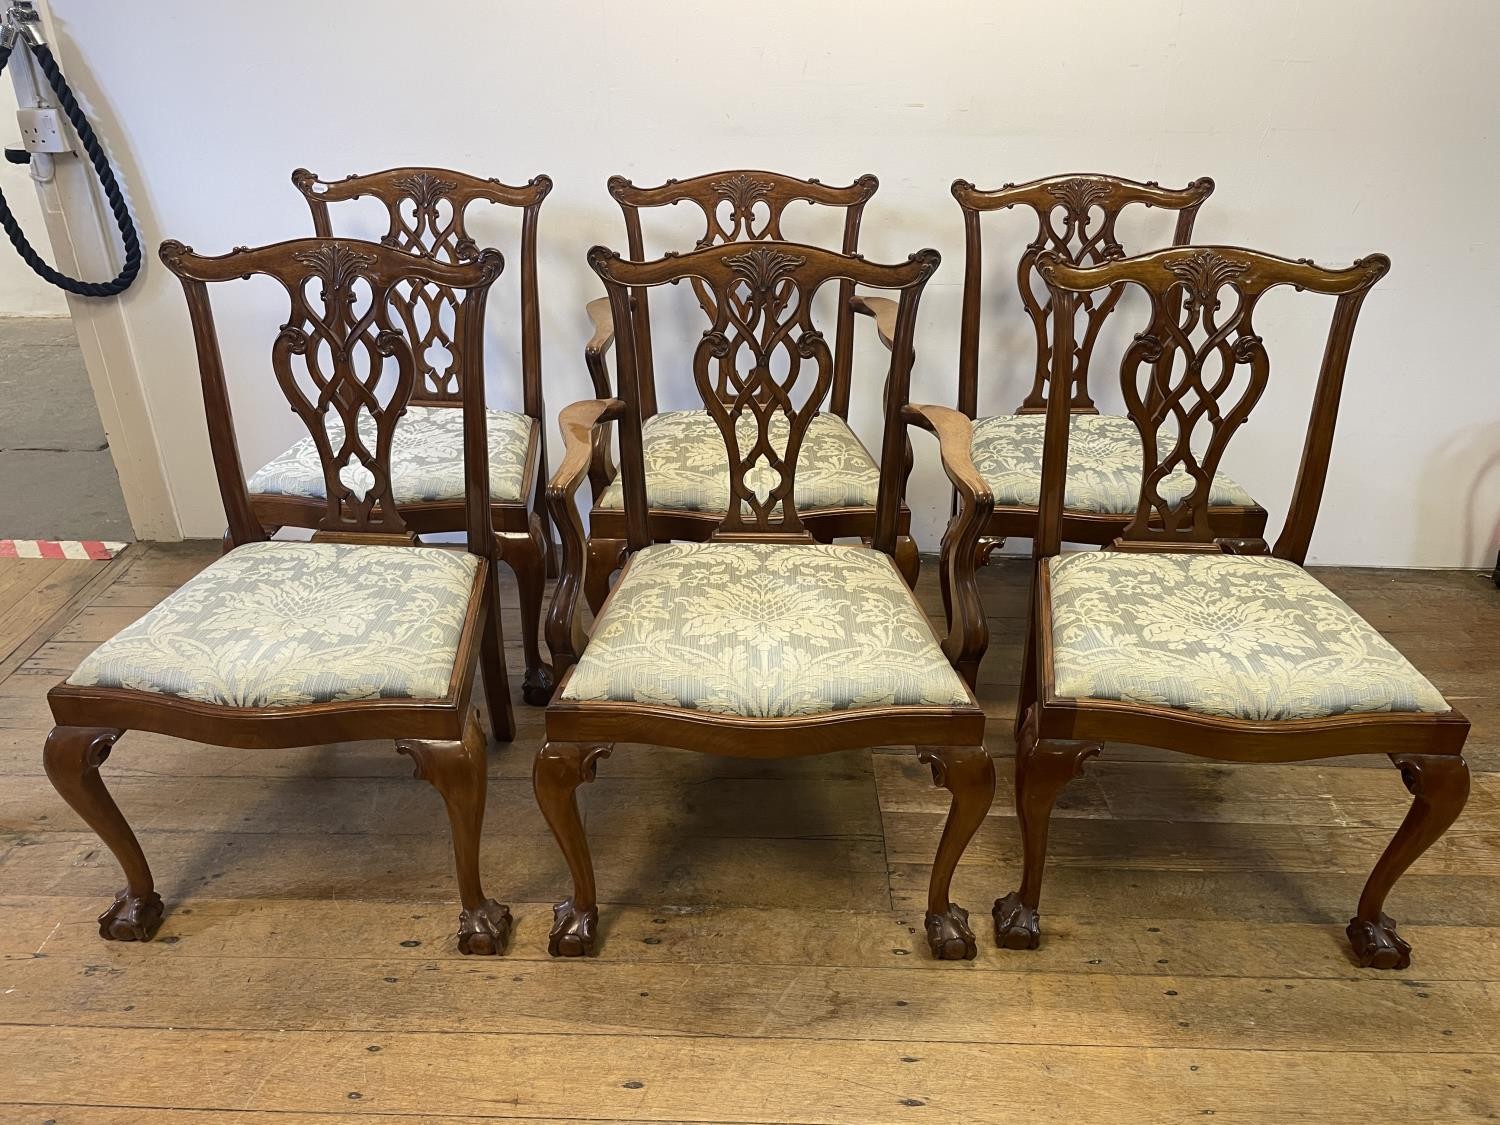 A set of six Chippendale style mahogany dining chairs with pierced splats, drop in seats, cabriole